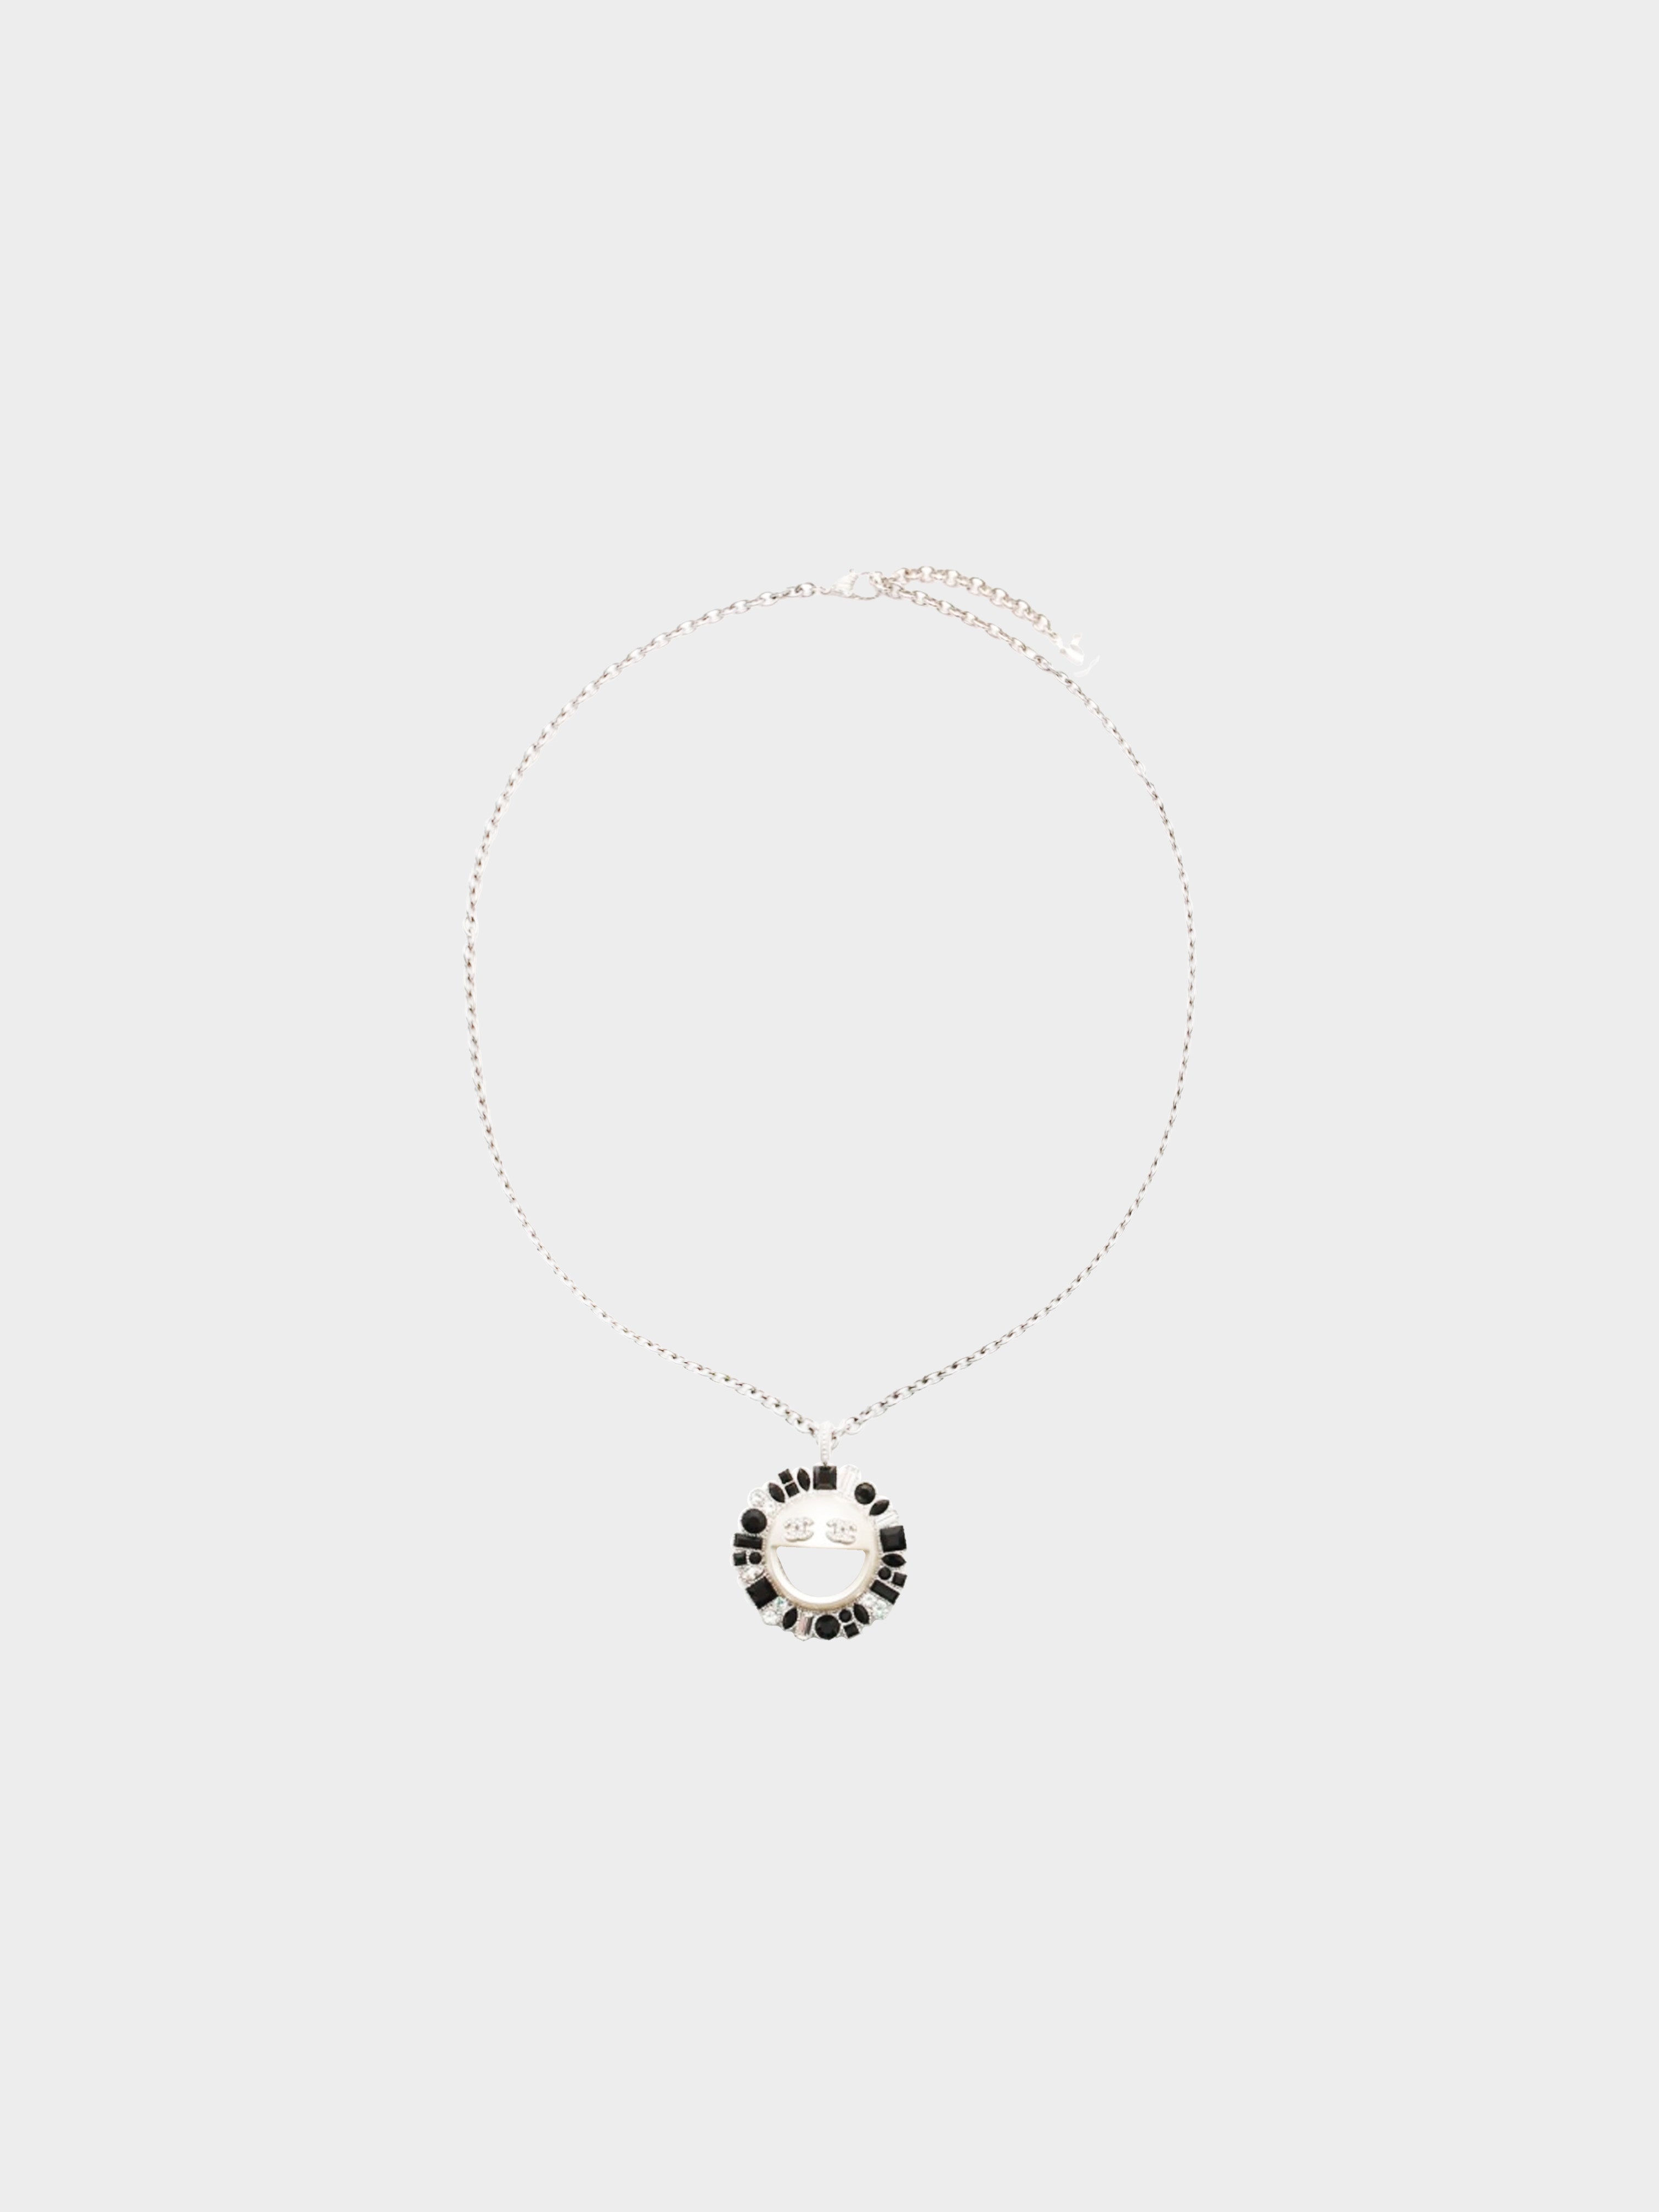 Chanel Fall 2016 Smiley Face Emoji Necklace